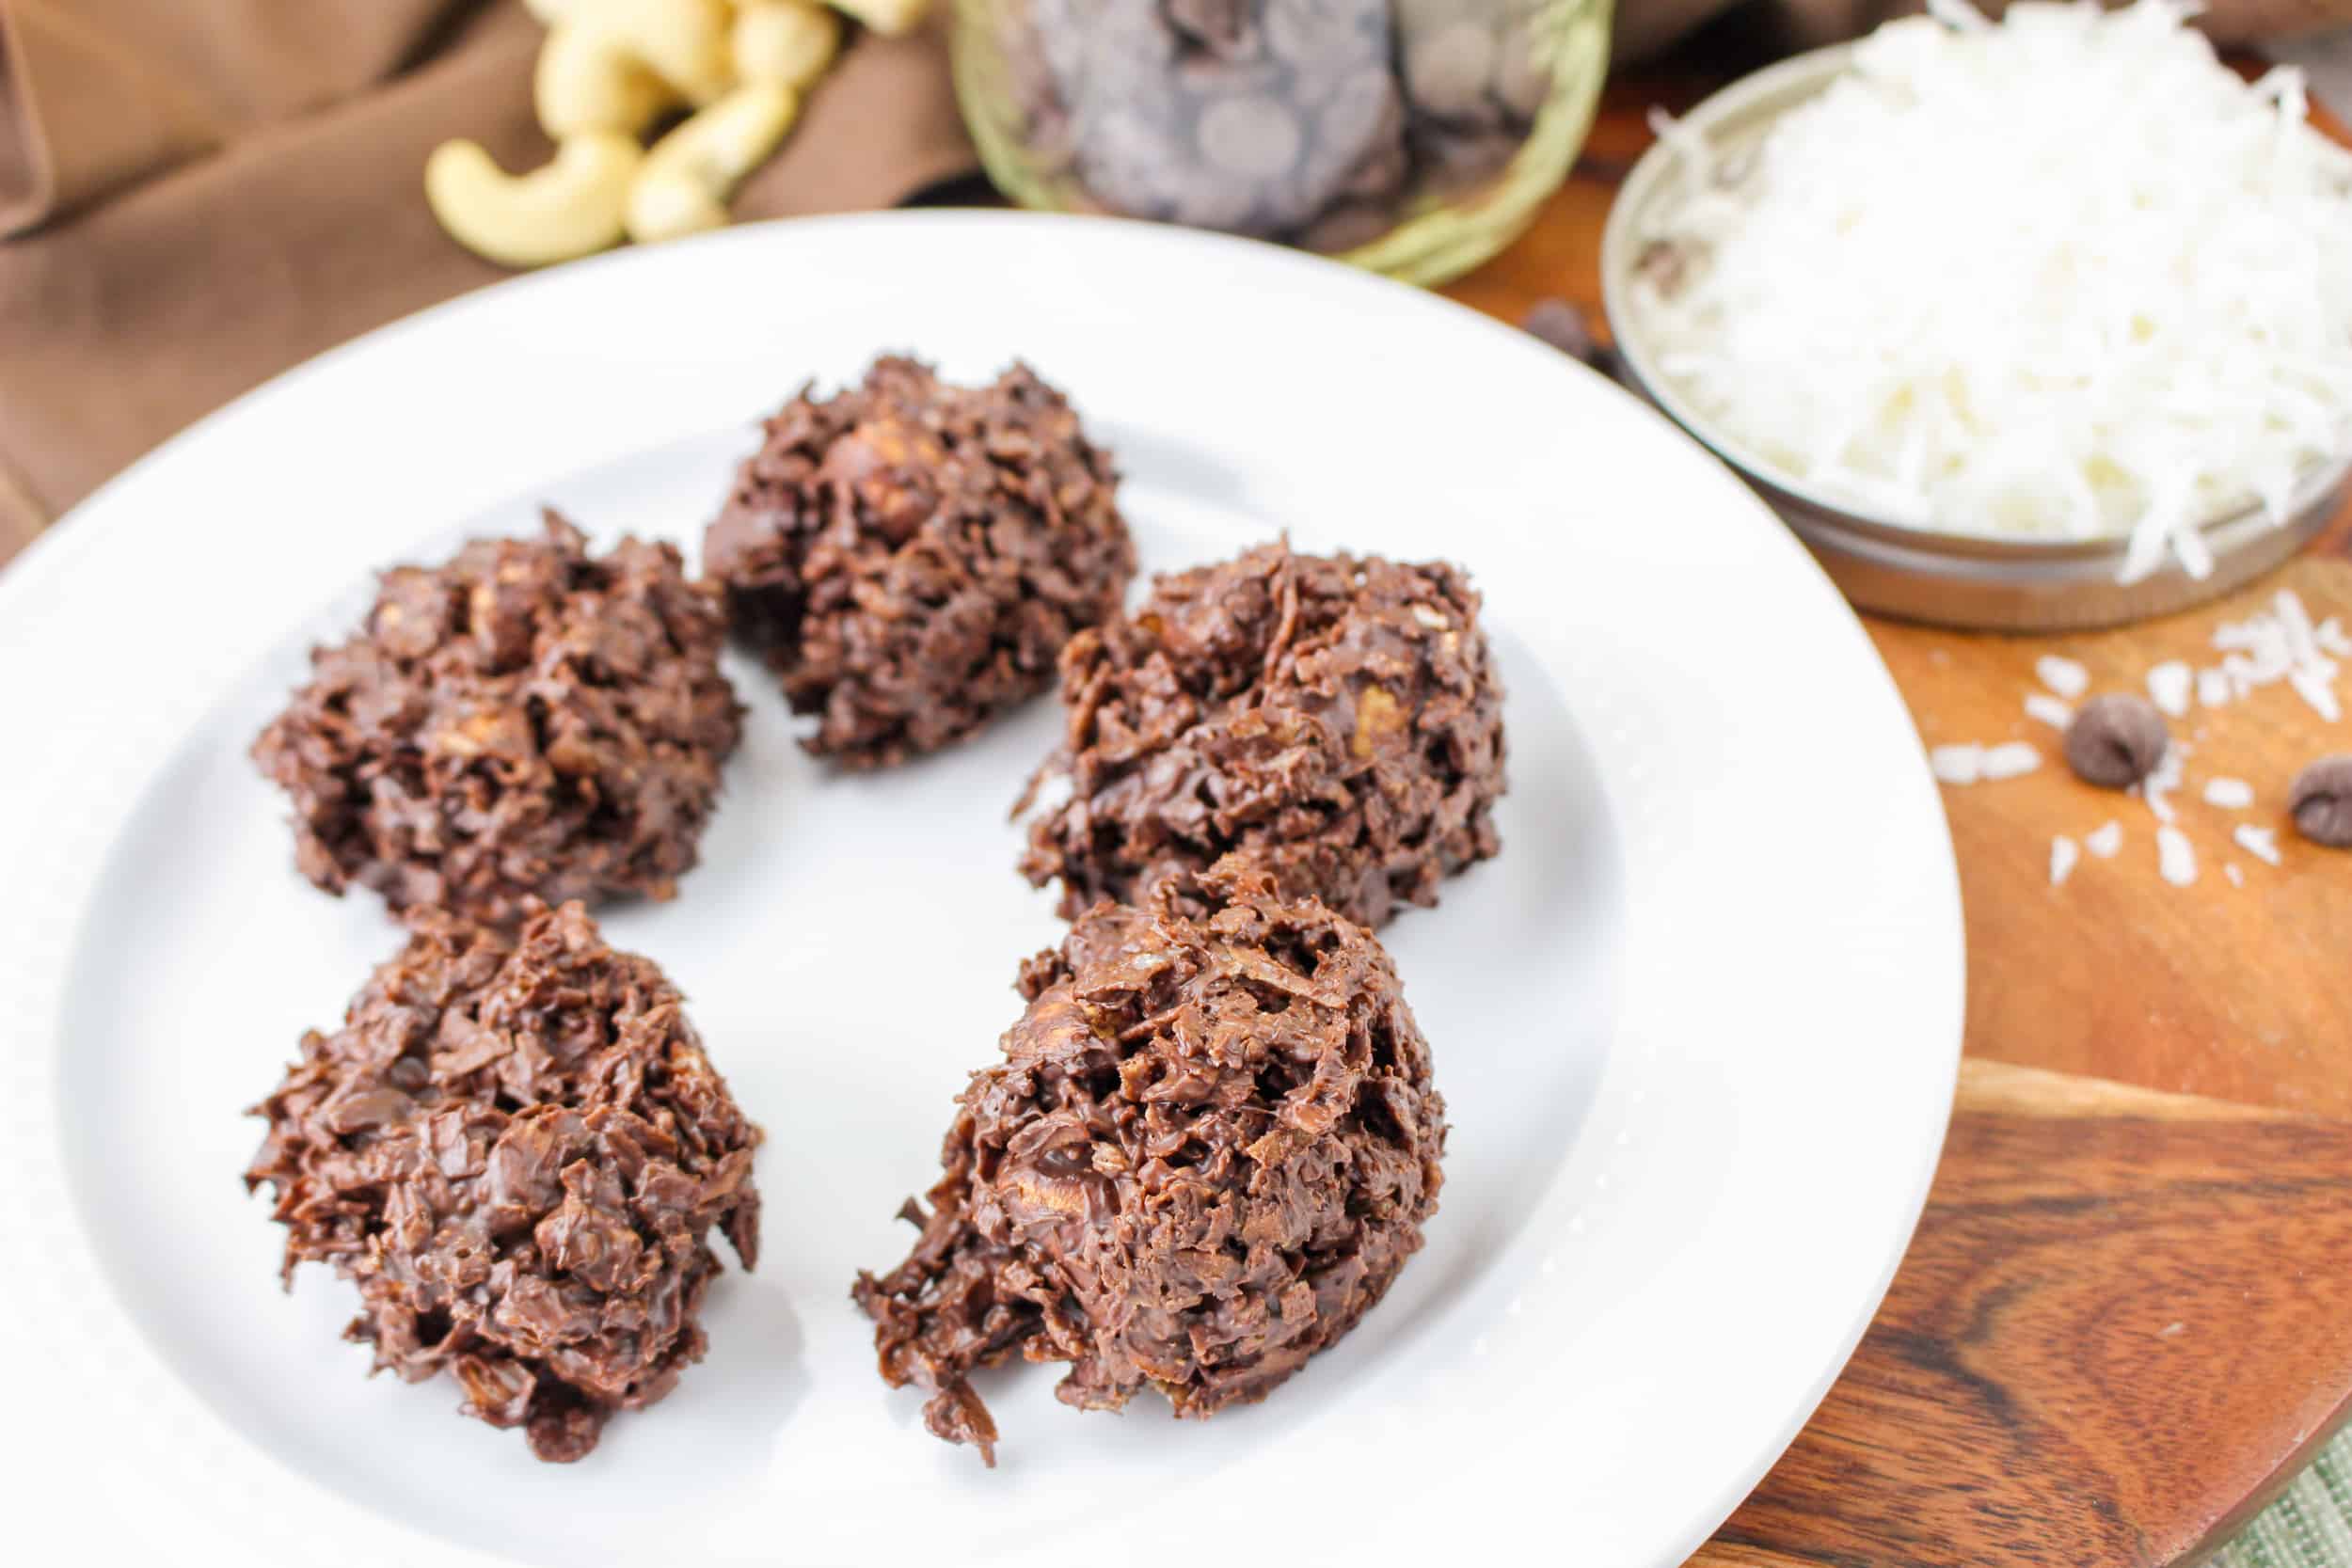 These delicious and easy chocolate coconut clusters only need three ingredients. They are so good! Plus, they're gluten-free and a great Passover treat.